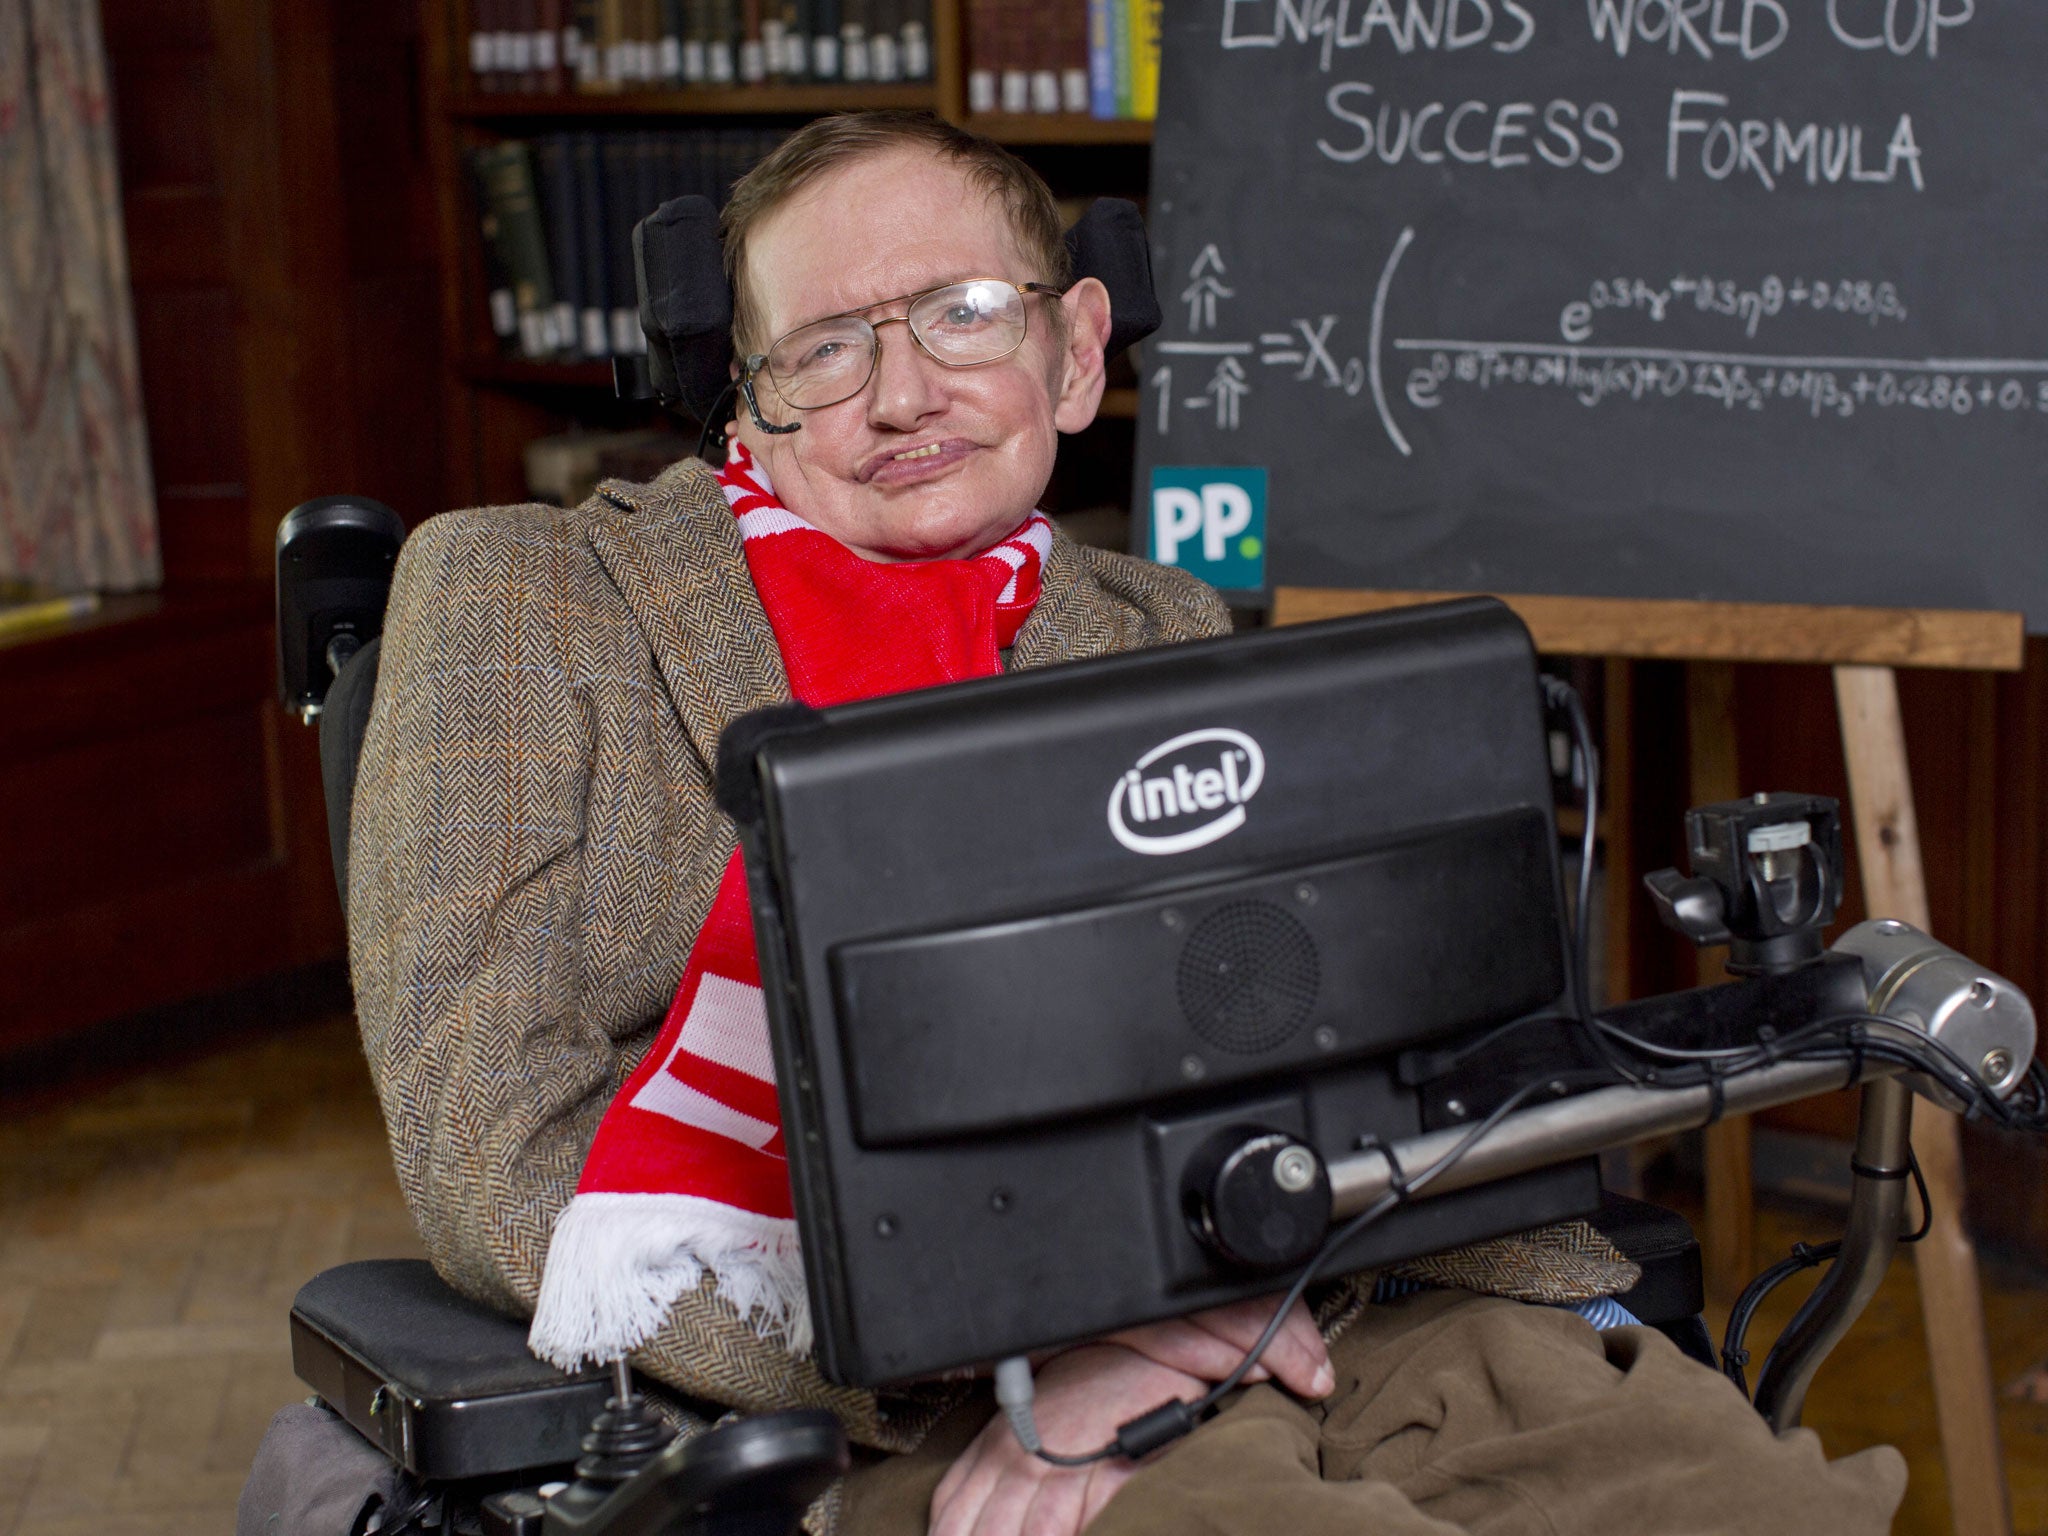 Professor Stephen Hawking has analysed data from every World Cup since 1966